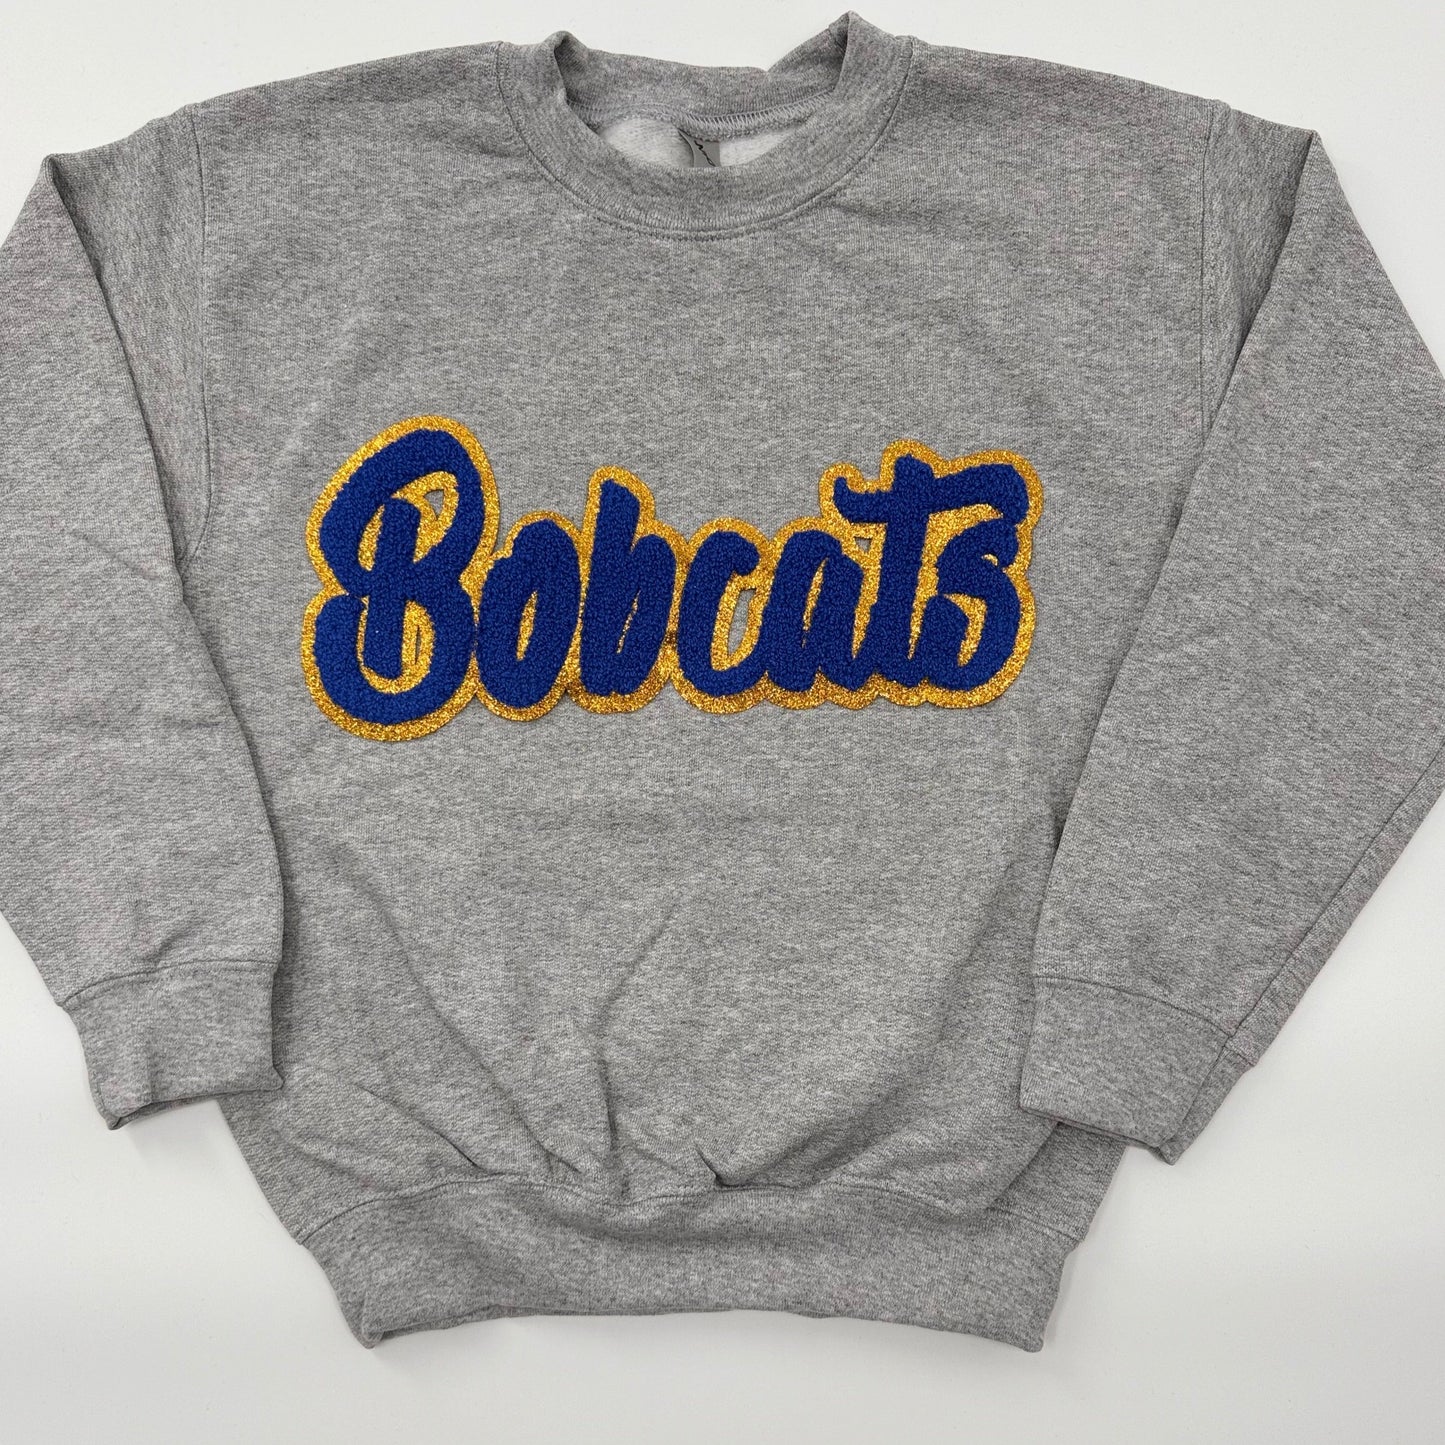 Bobcats Chenille Patch in a Women's UNISEX Crewneck (see pictures for Sweatshirt Style)